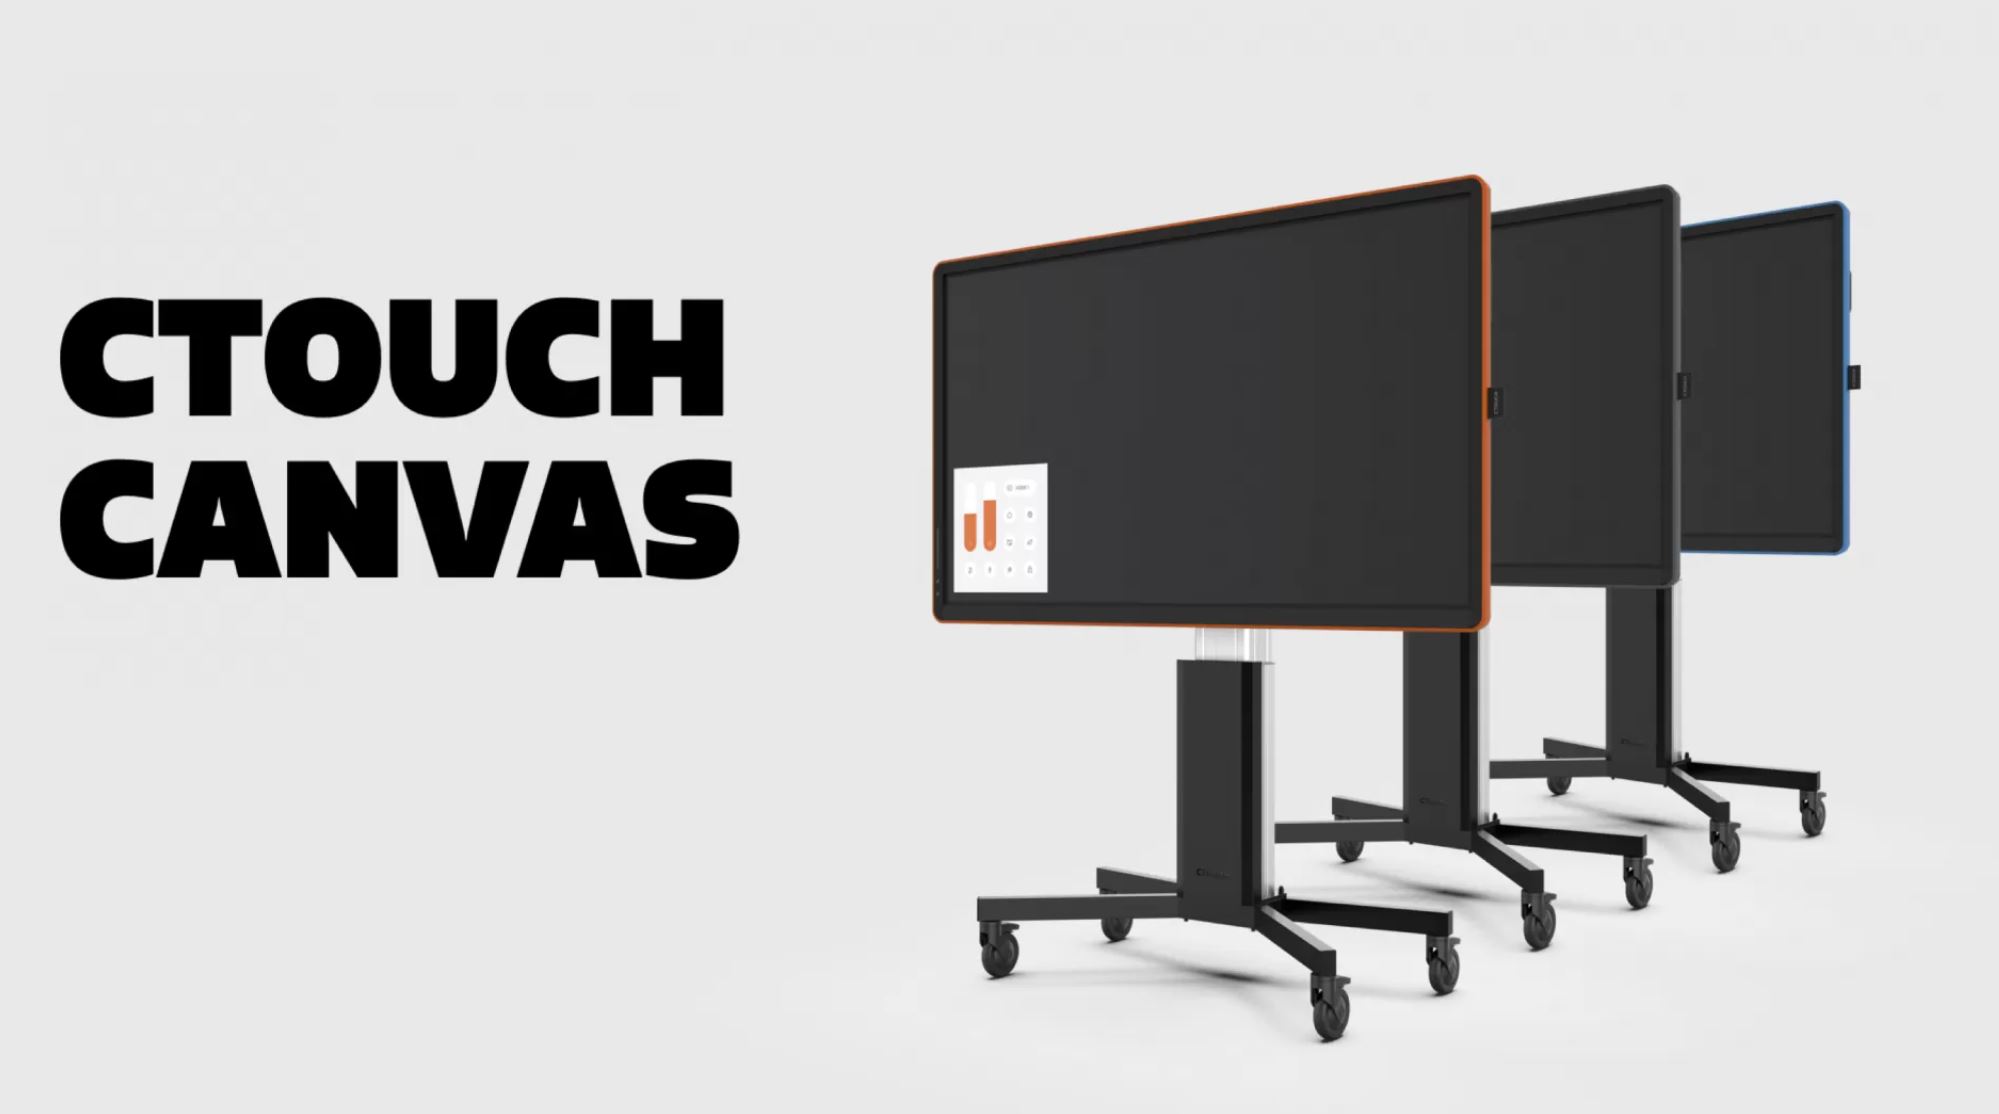 CTOUCH Canvas 65 - Shelf Orange - 65 inch - 350 cd/m² - Ultra HD - 4K - 3840x2160 - NO-OS operating system - 20 point - Touch Display